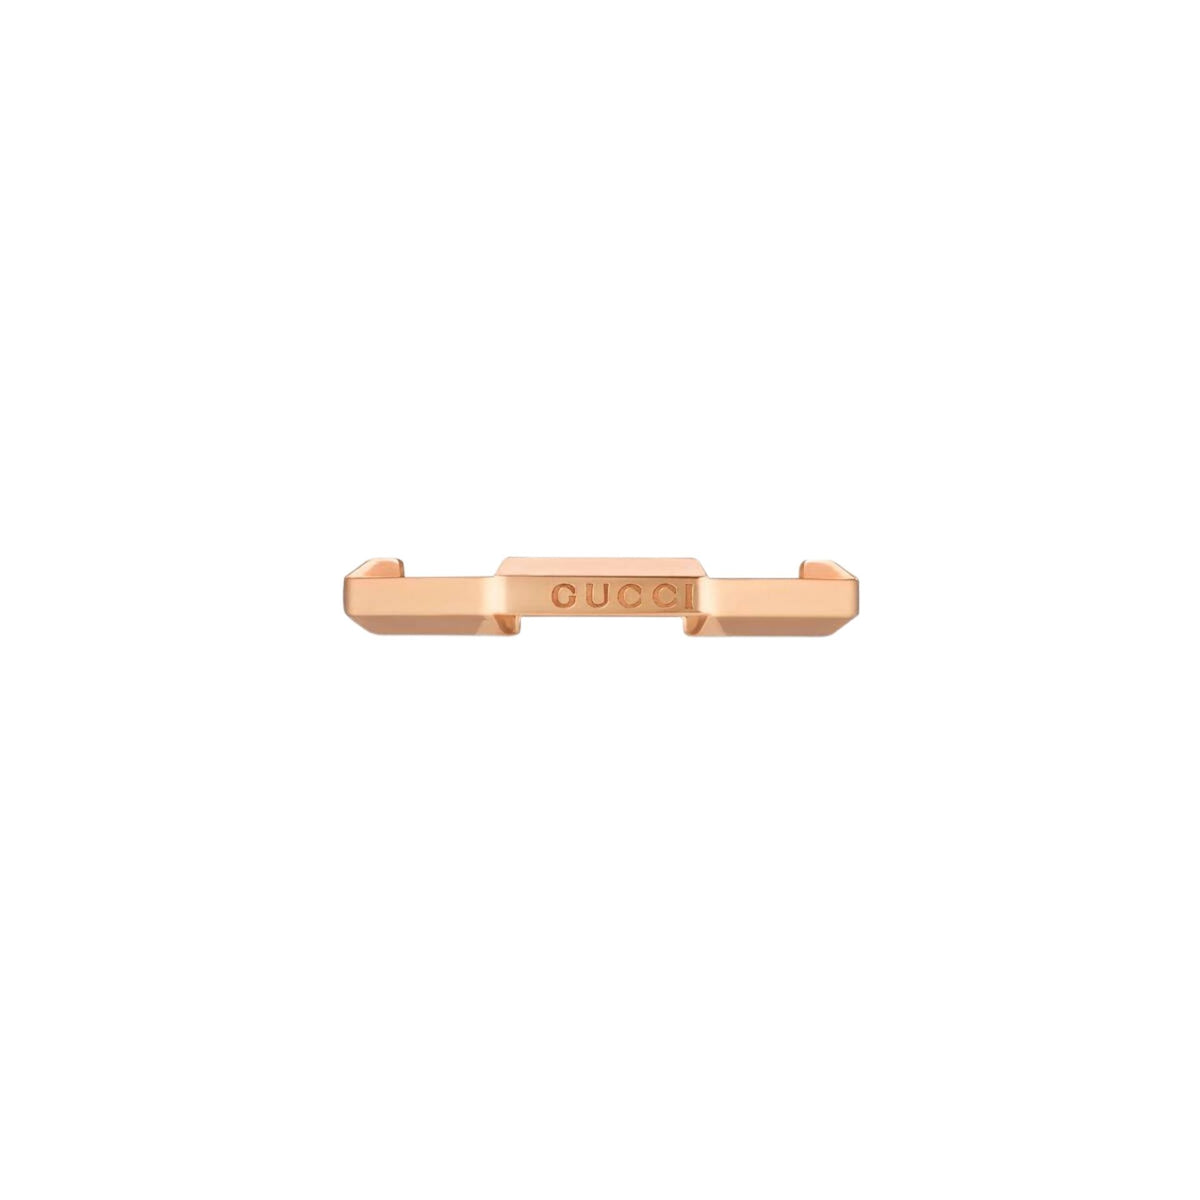 Gucci Link to Love Ring in 18k Rose Gold (3mm) - Orsini Jewellers NZ